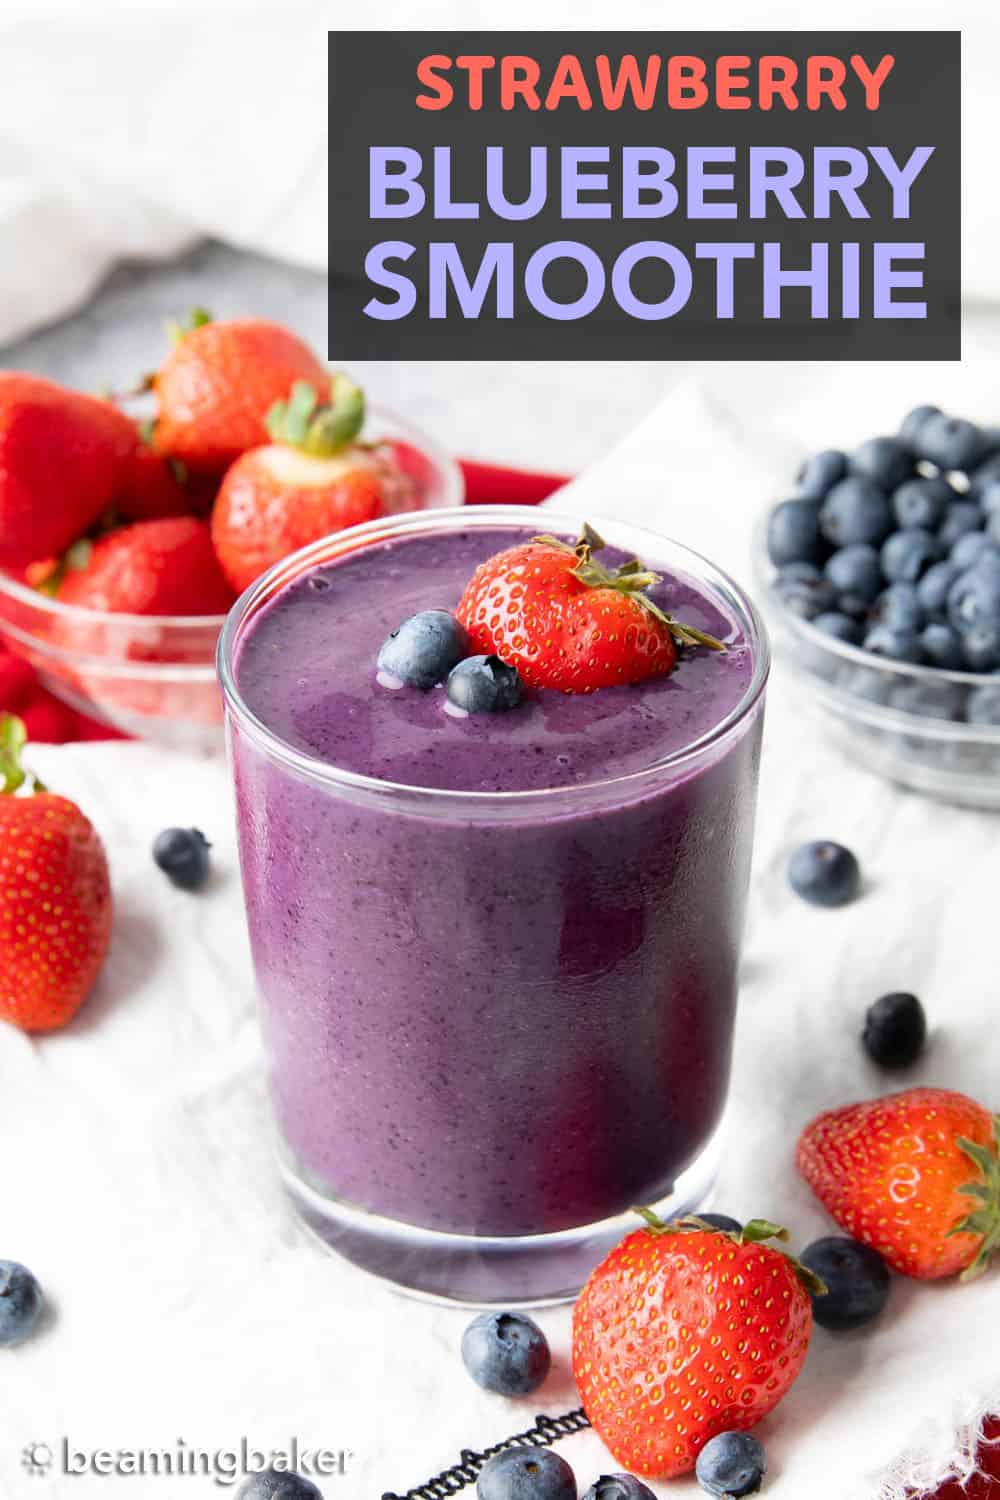 Strawberry Blueberry Smoothie - Beaming Baker